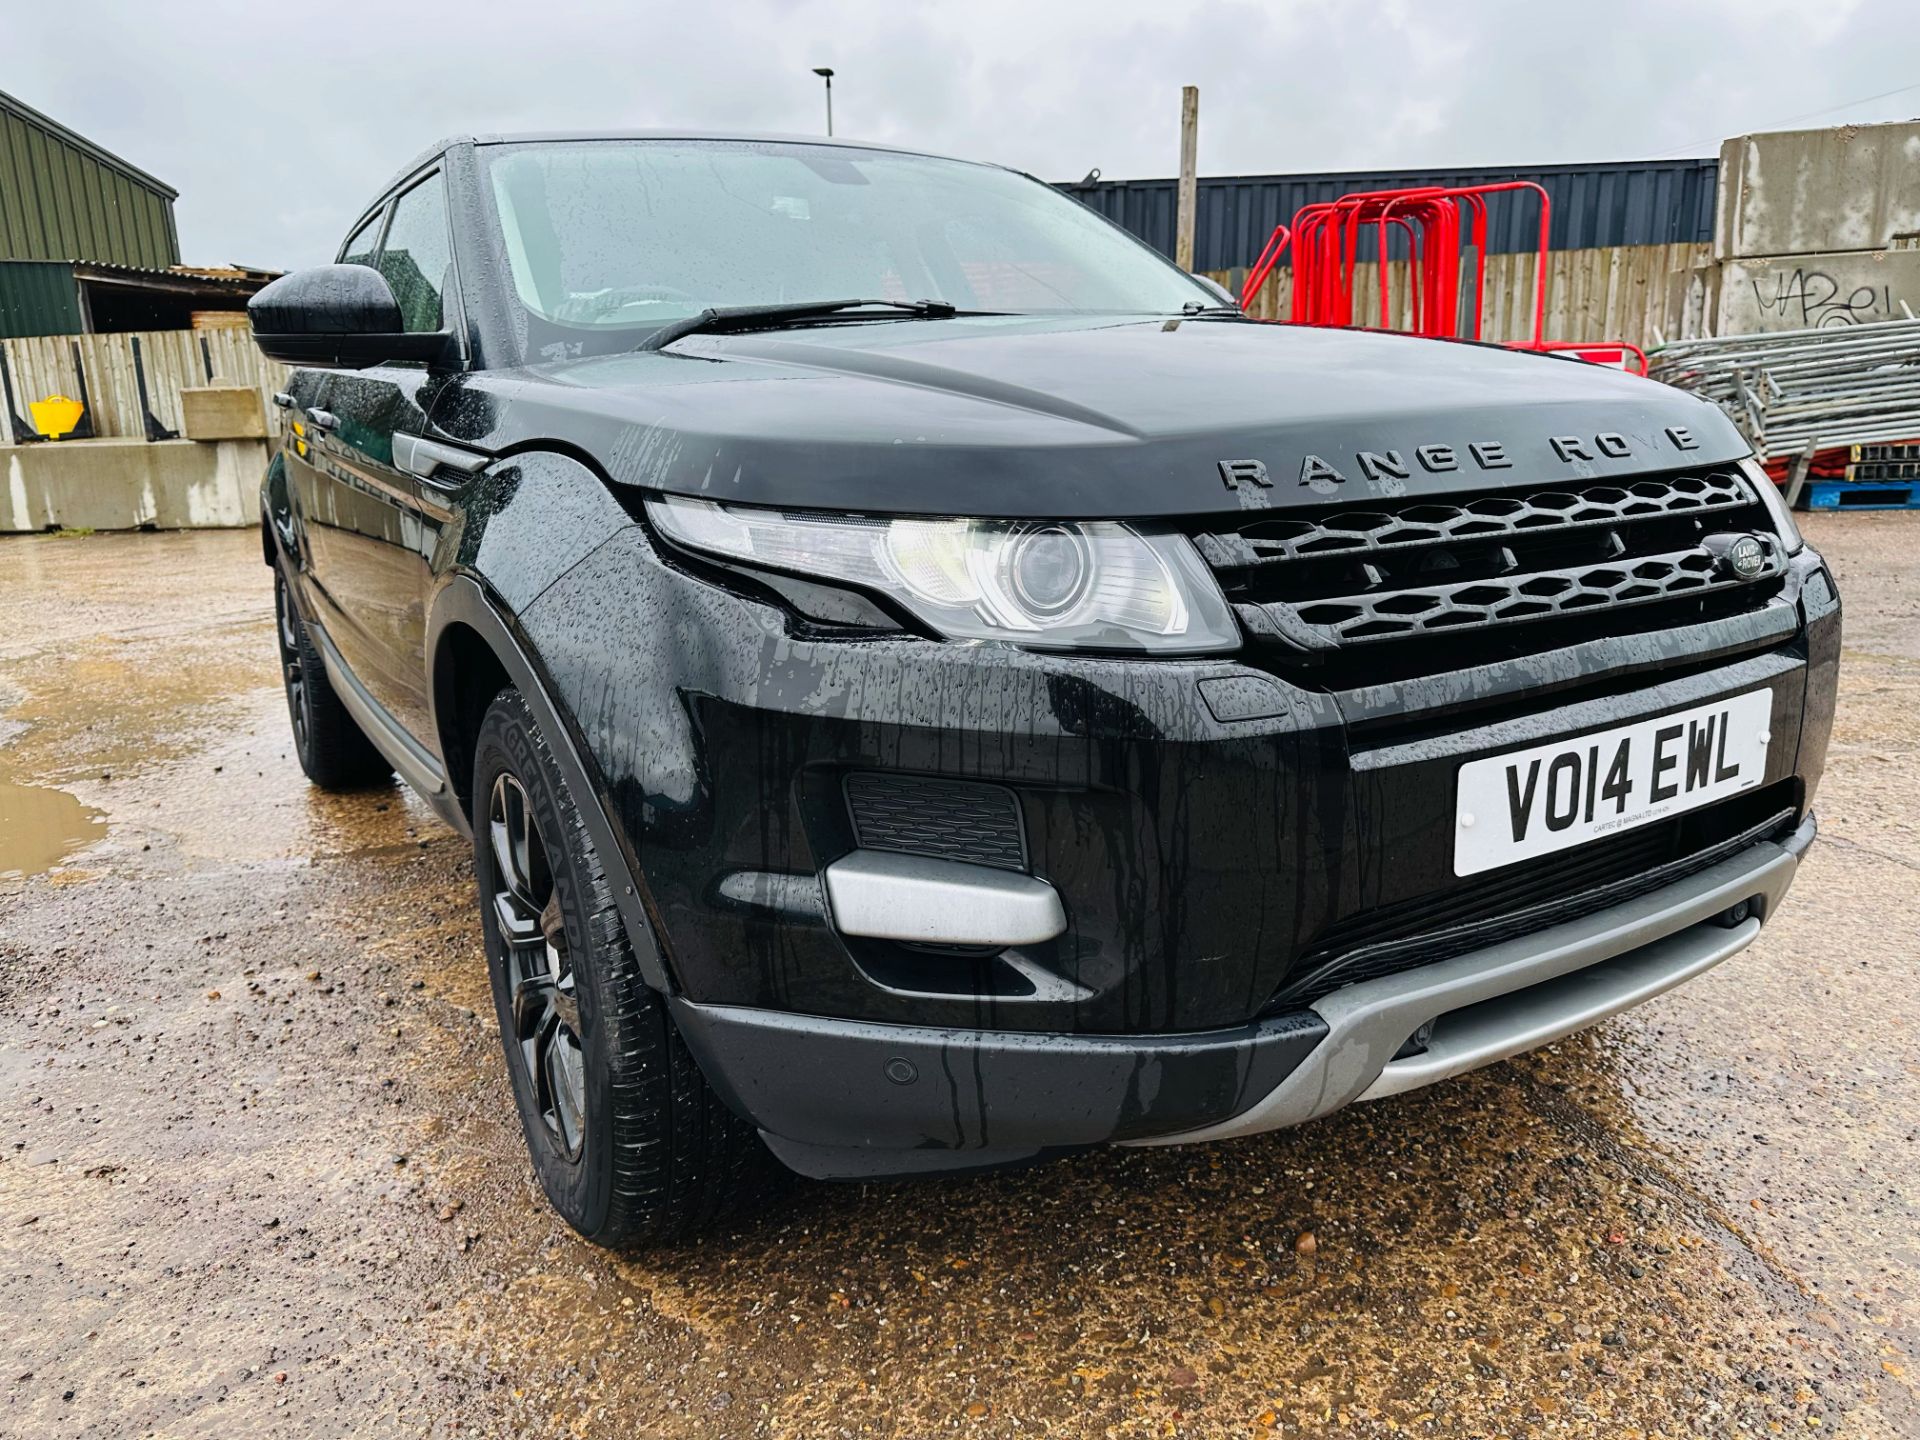 (RESERVE MET) LAND ROVER EVOQUE PURE 2.2 ED4 *TECH PACK* AIR CON - FULL LEATHER INTERIOR - NO VAT - Image 3 of 43